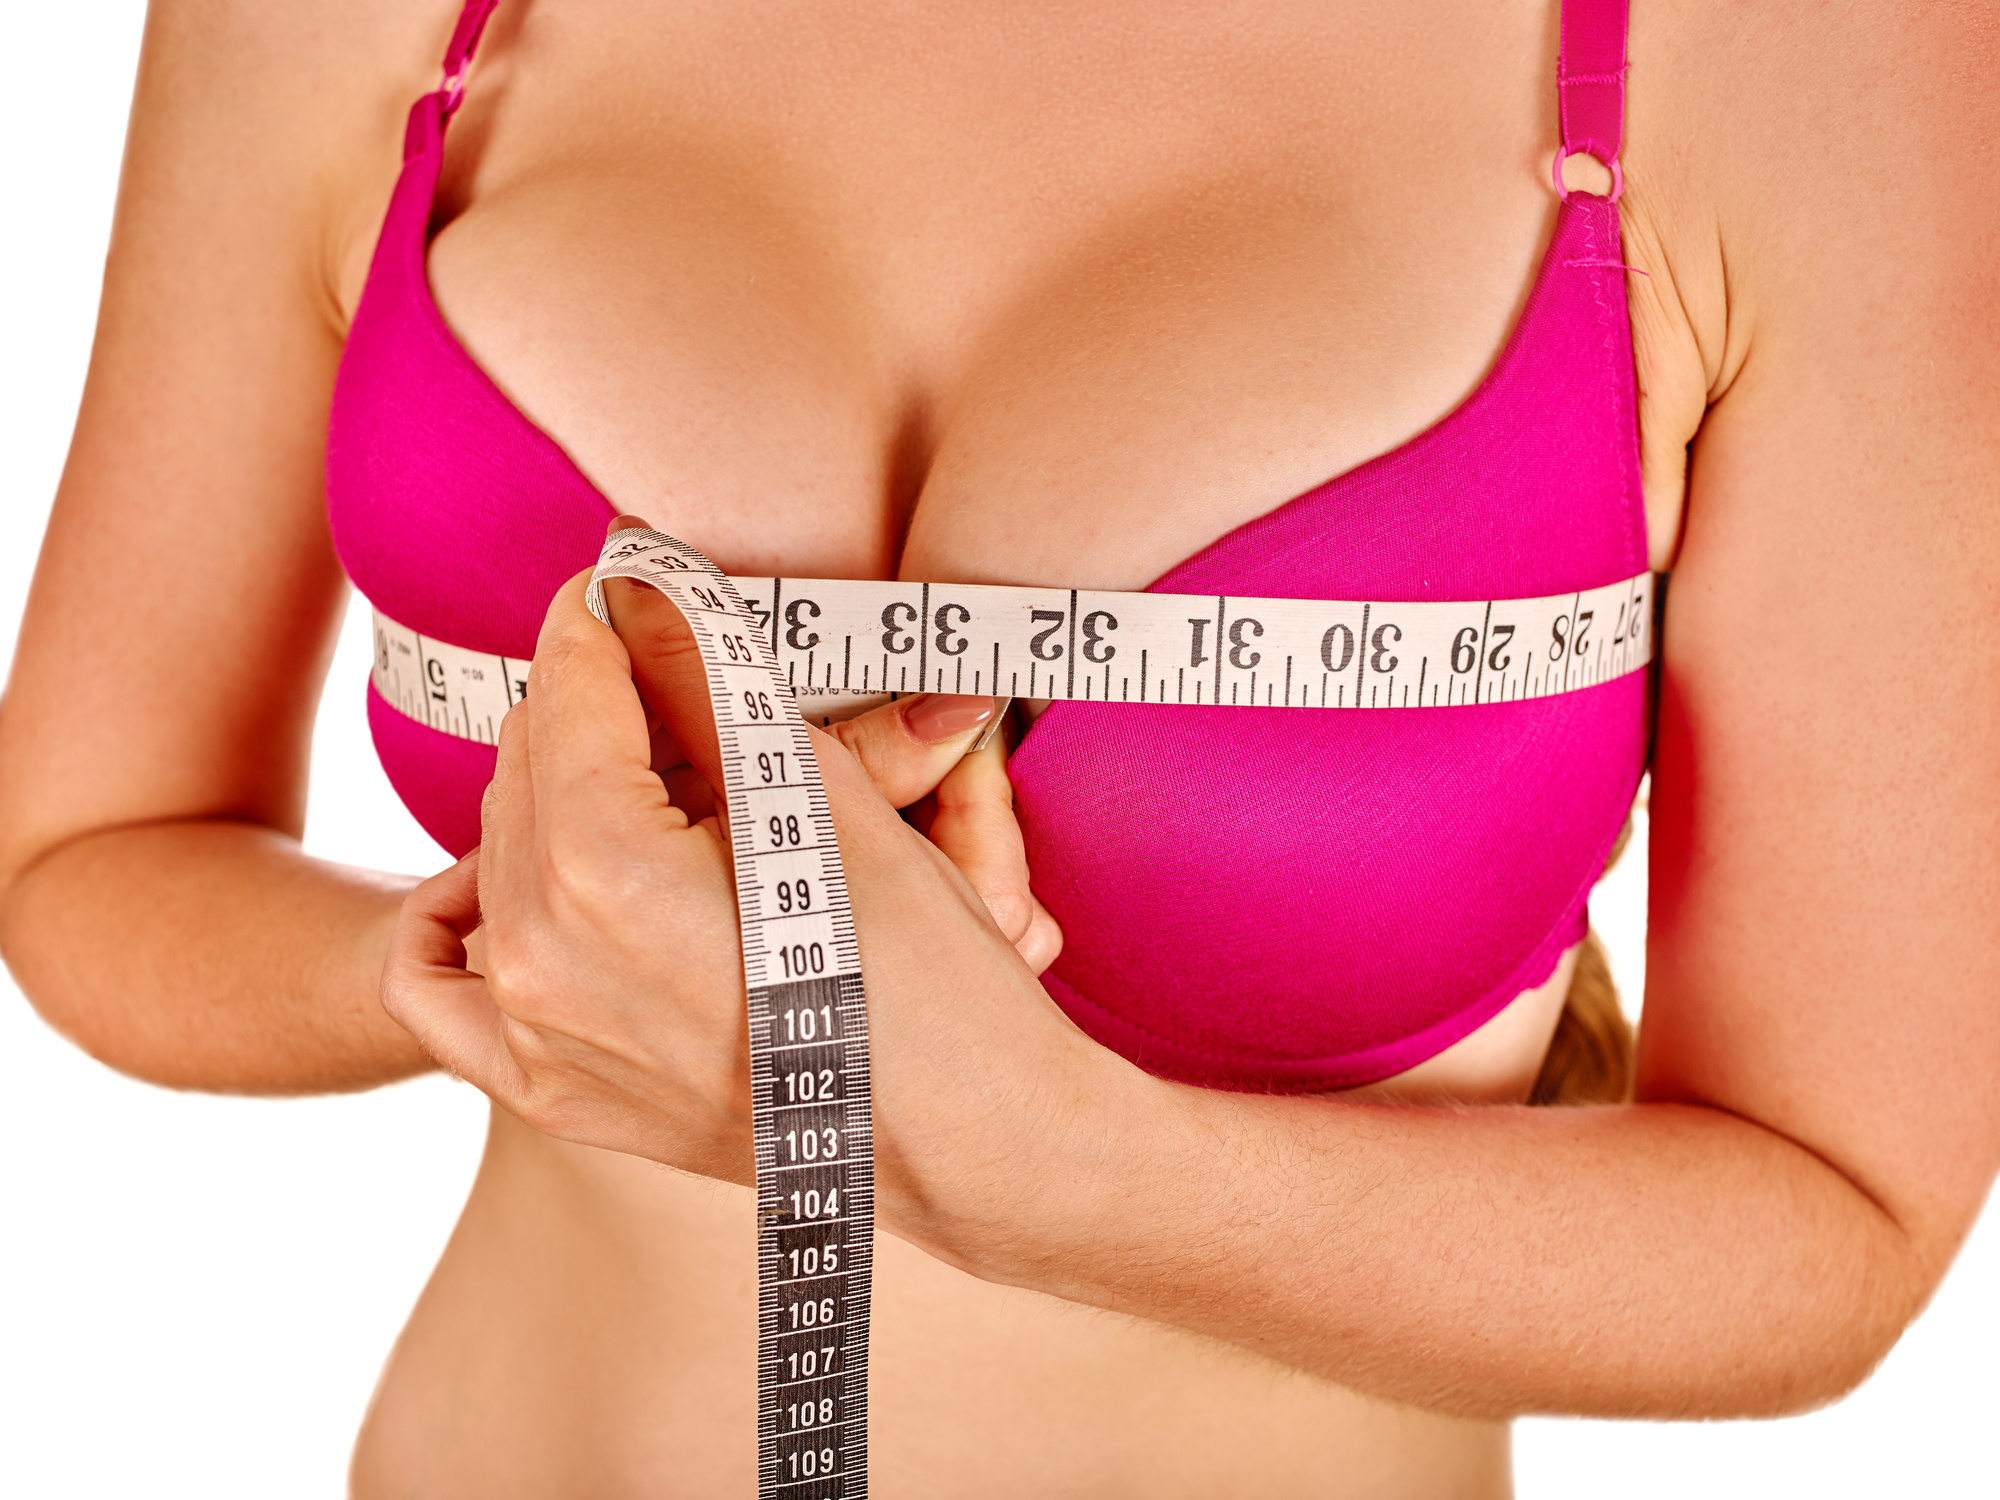 Is It Possible To Naturally Reduce Breast Size? - Berlet Plastic Surgery